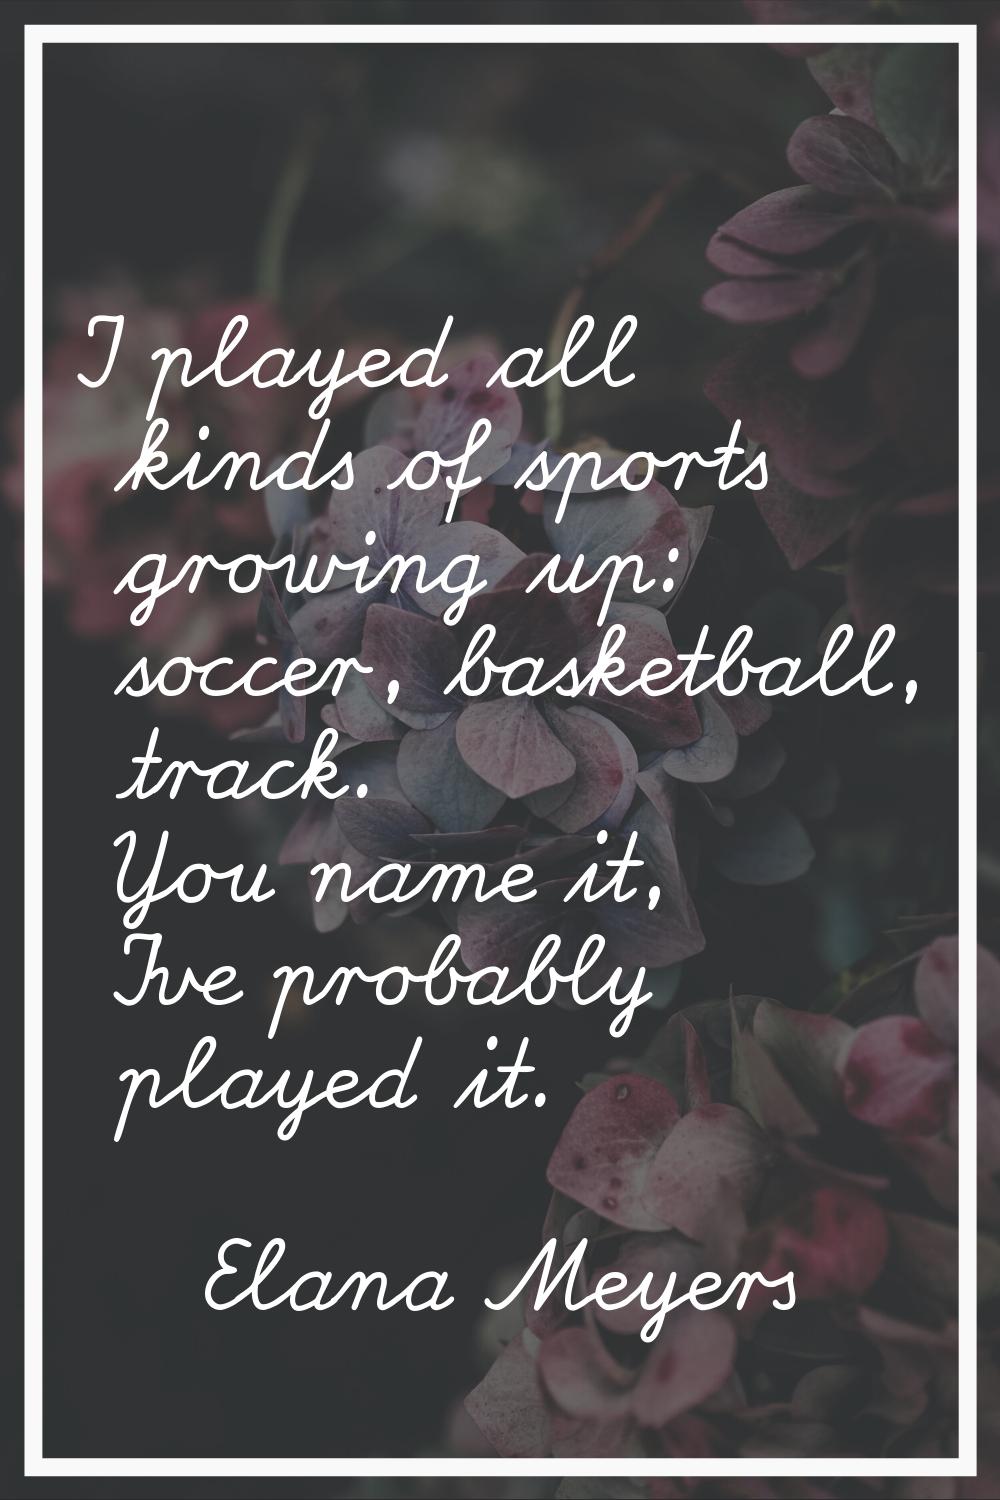 I played all kinds of sports growing up: soccer, basketball, track. You name it, I've probably play